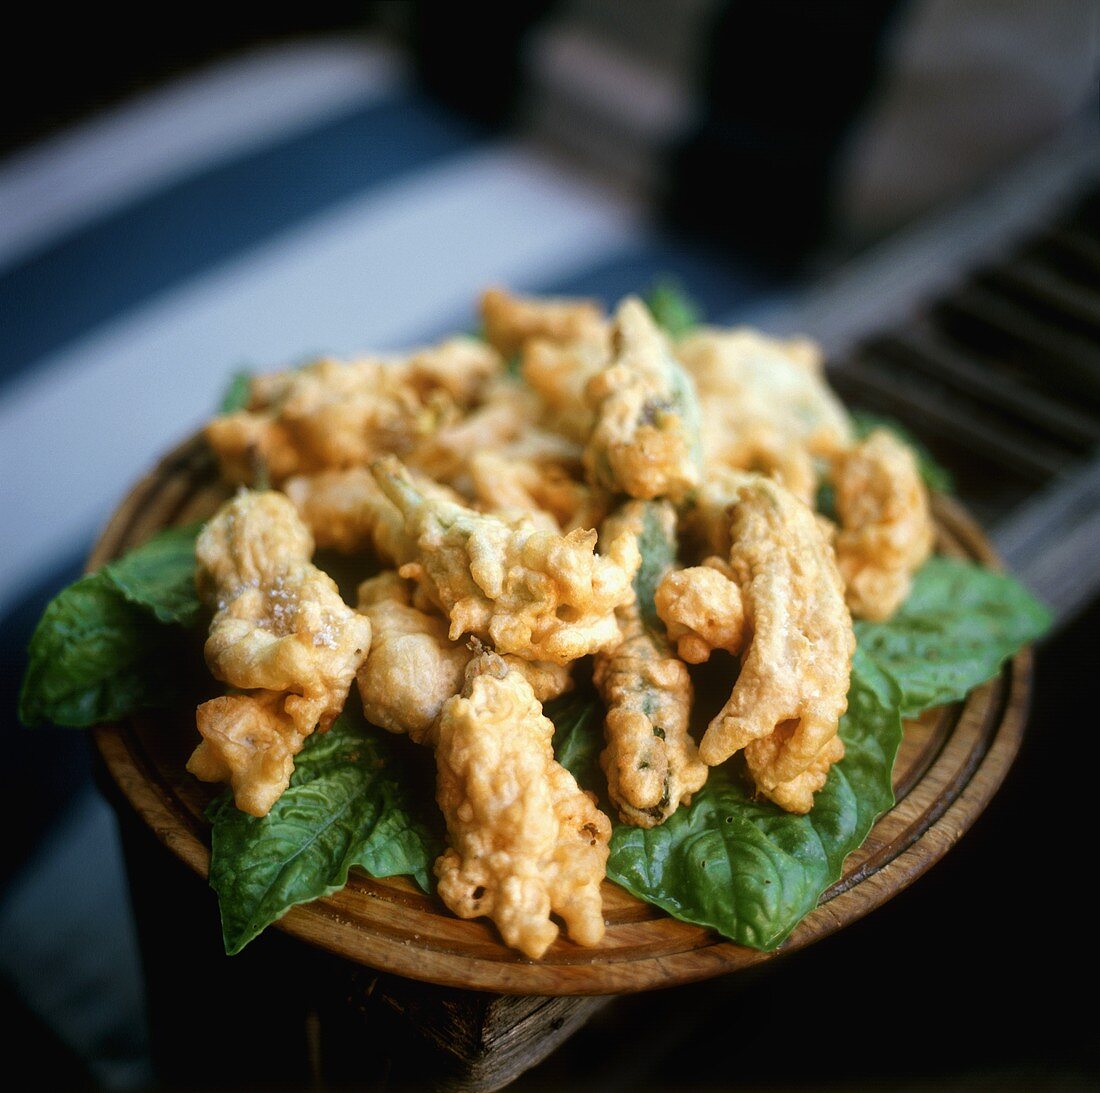 Deep-fried herbs on spinach leaves